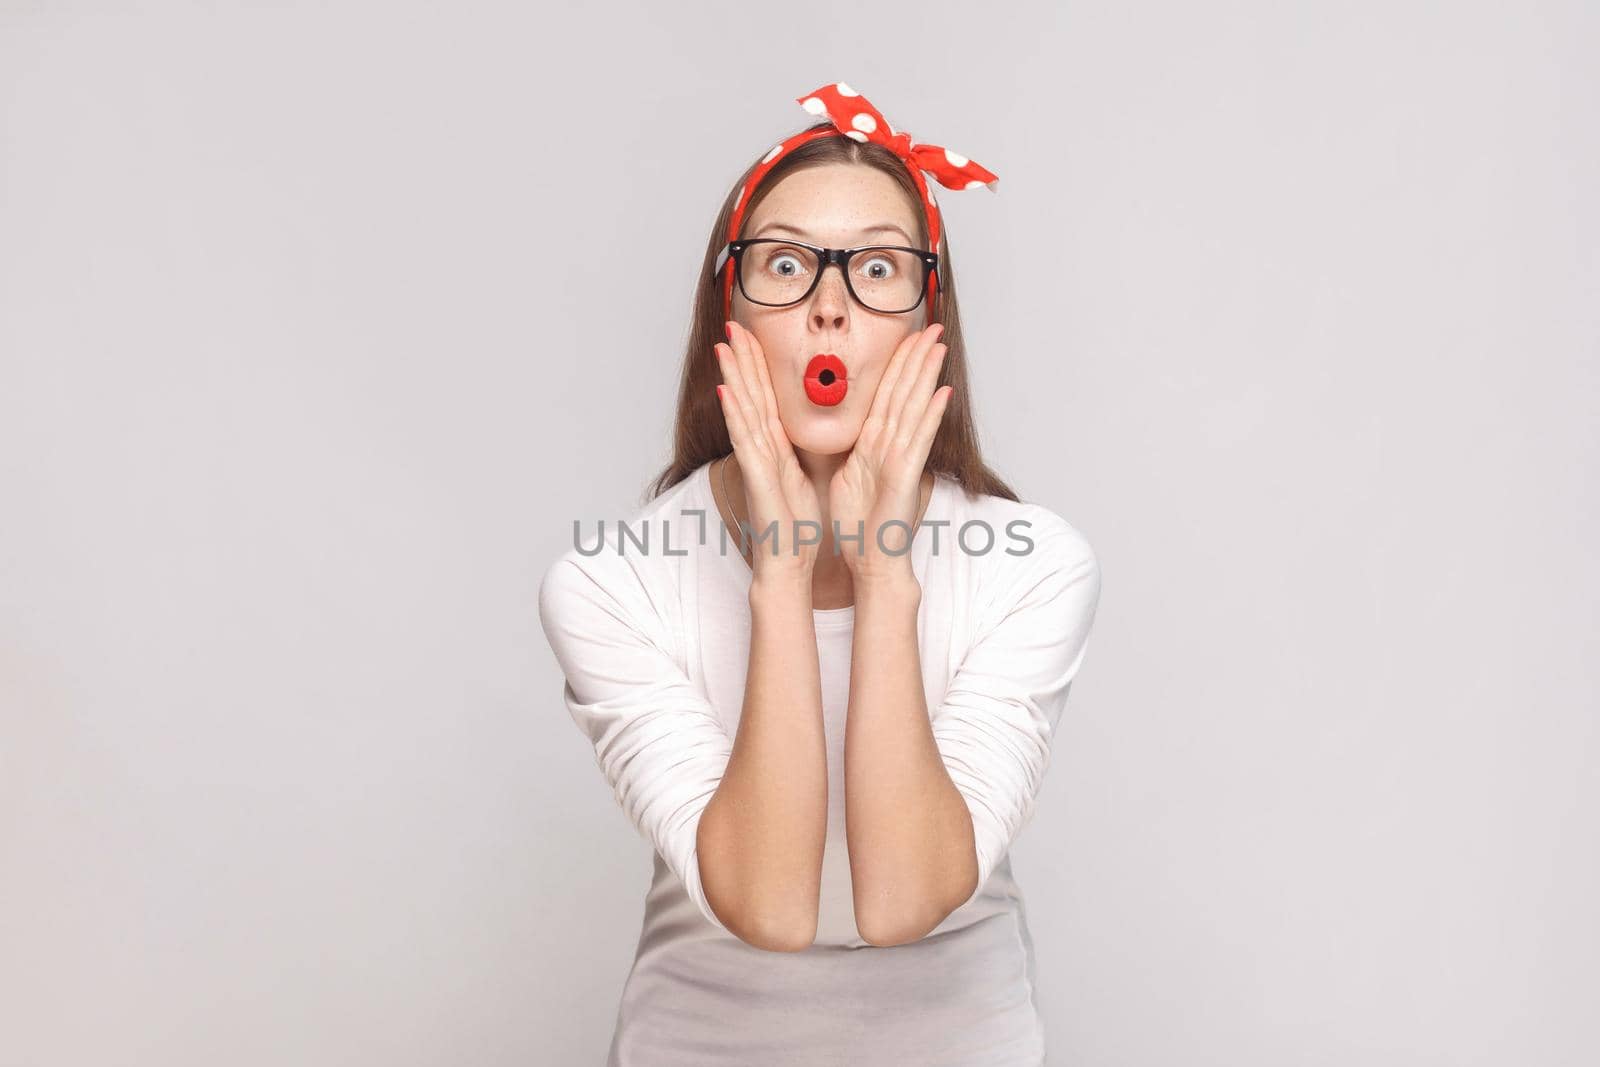 woman in white t-shirt with freckles, black glasses, red lips and head band. by Khosro1